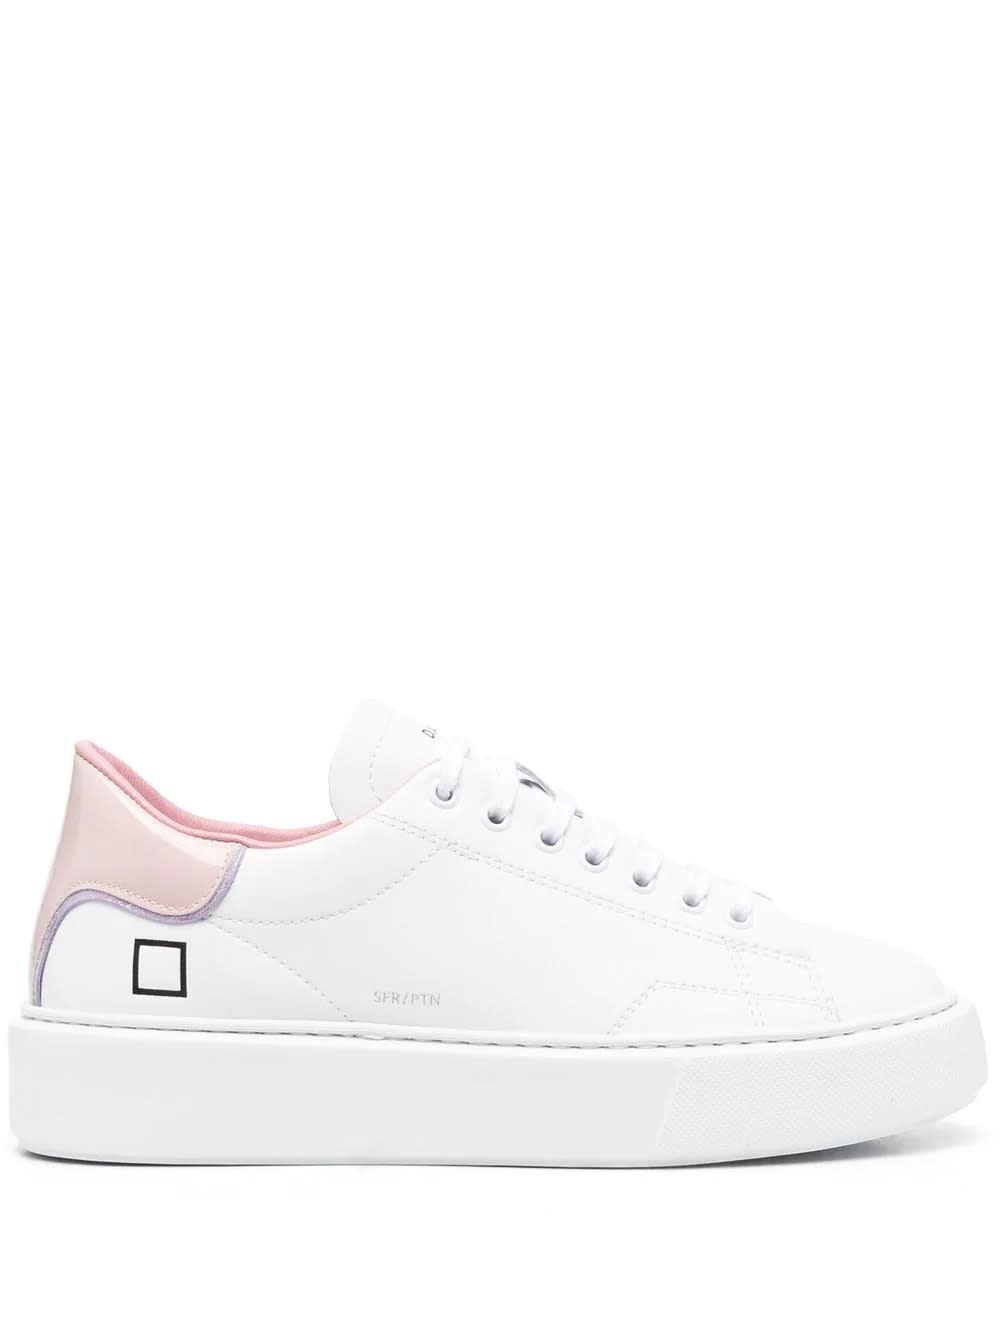 D.A.T.E. White And Pink Sfera Patent Sneakers